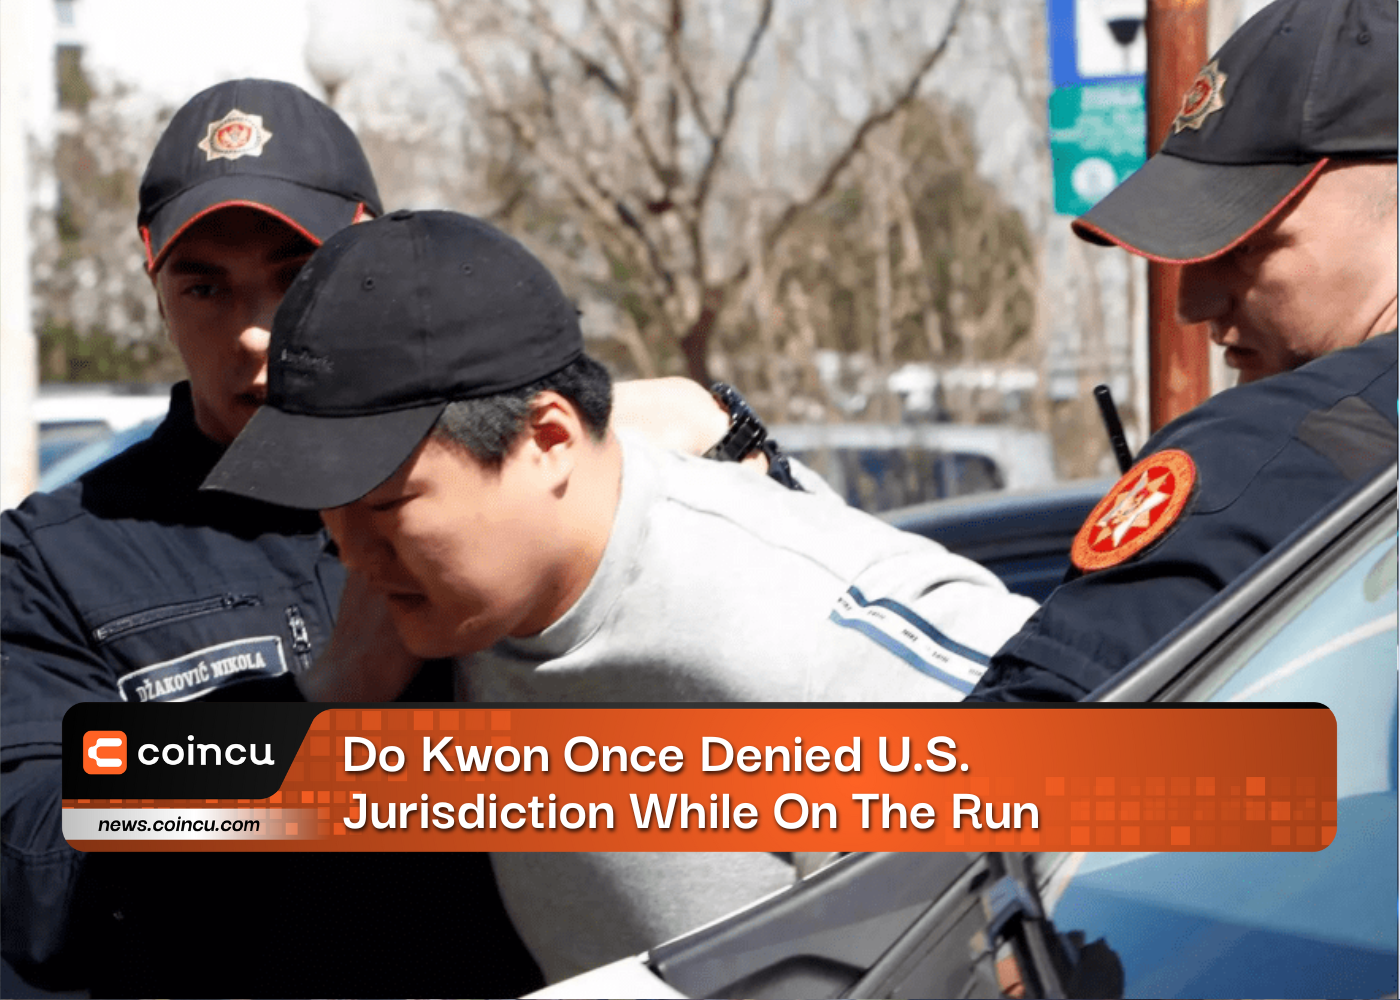 Do Kwon Once Denied U.S. Jurisdiction While On The Run